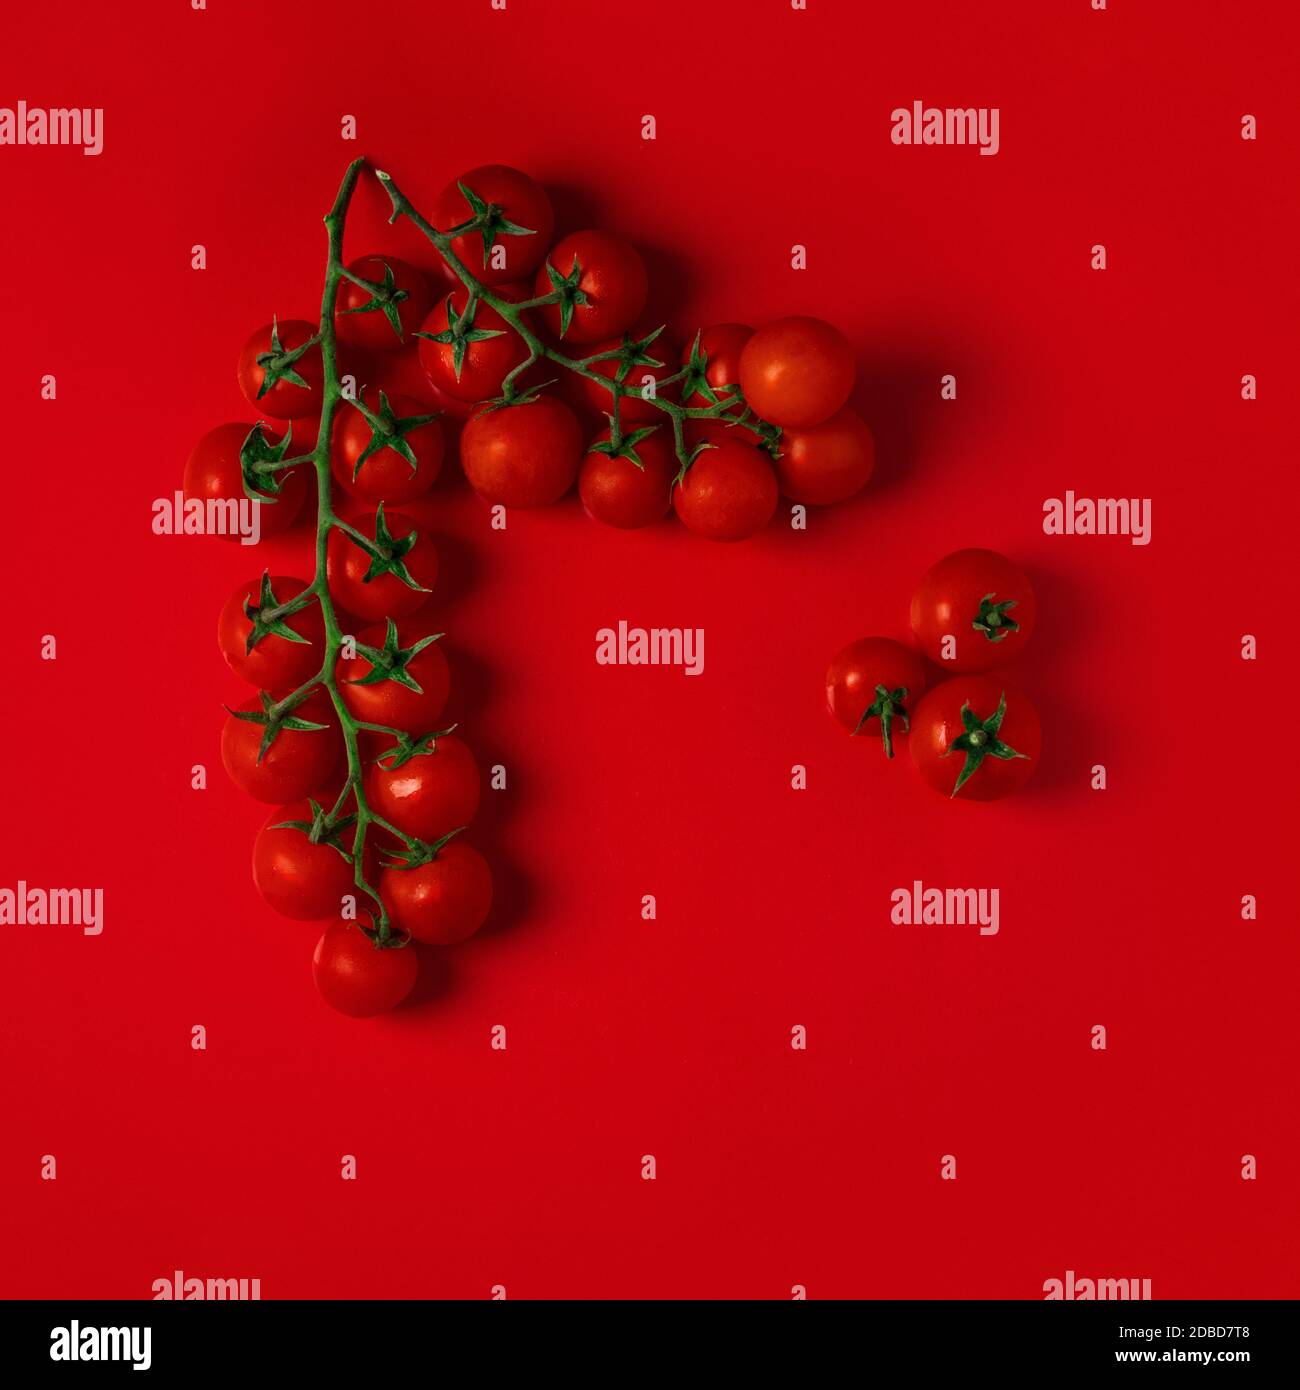 Fresh organic branch of tomatoes on a red background. Horizontal orientation, top view, copyspace. Stock Photo